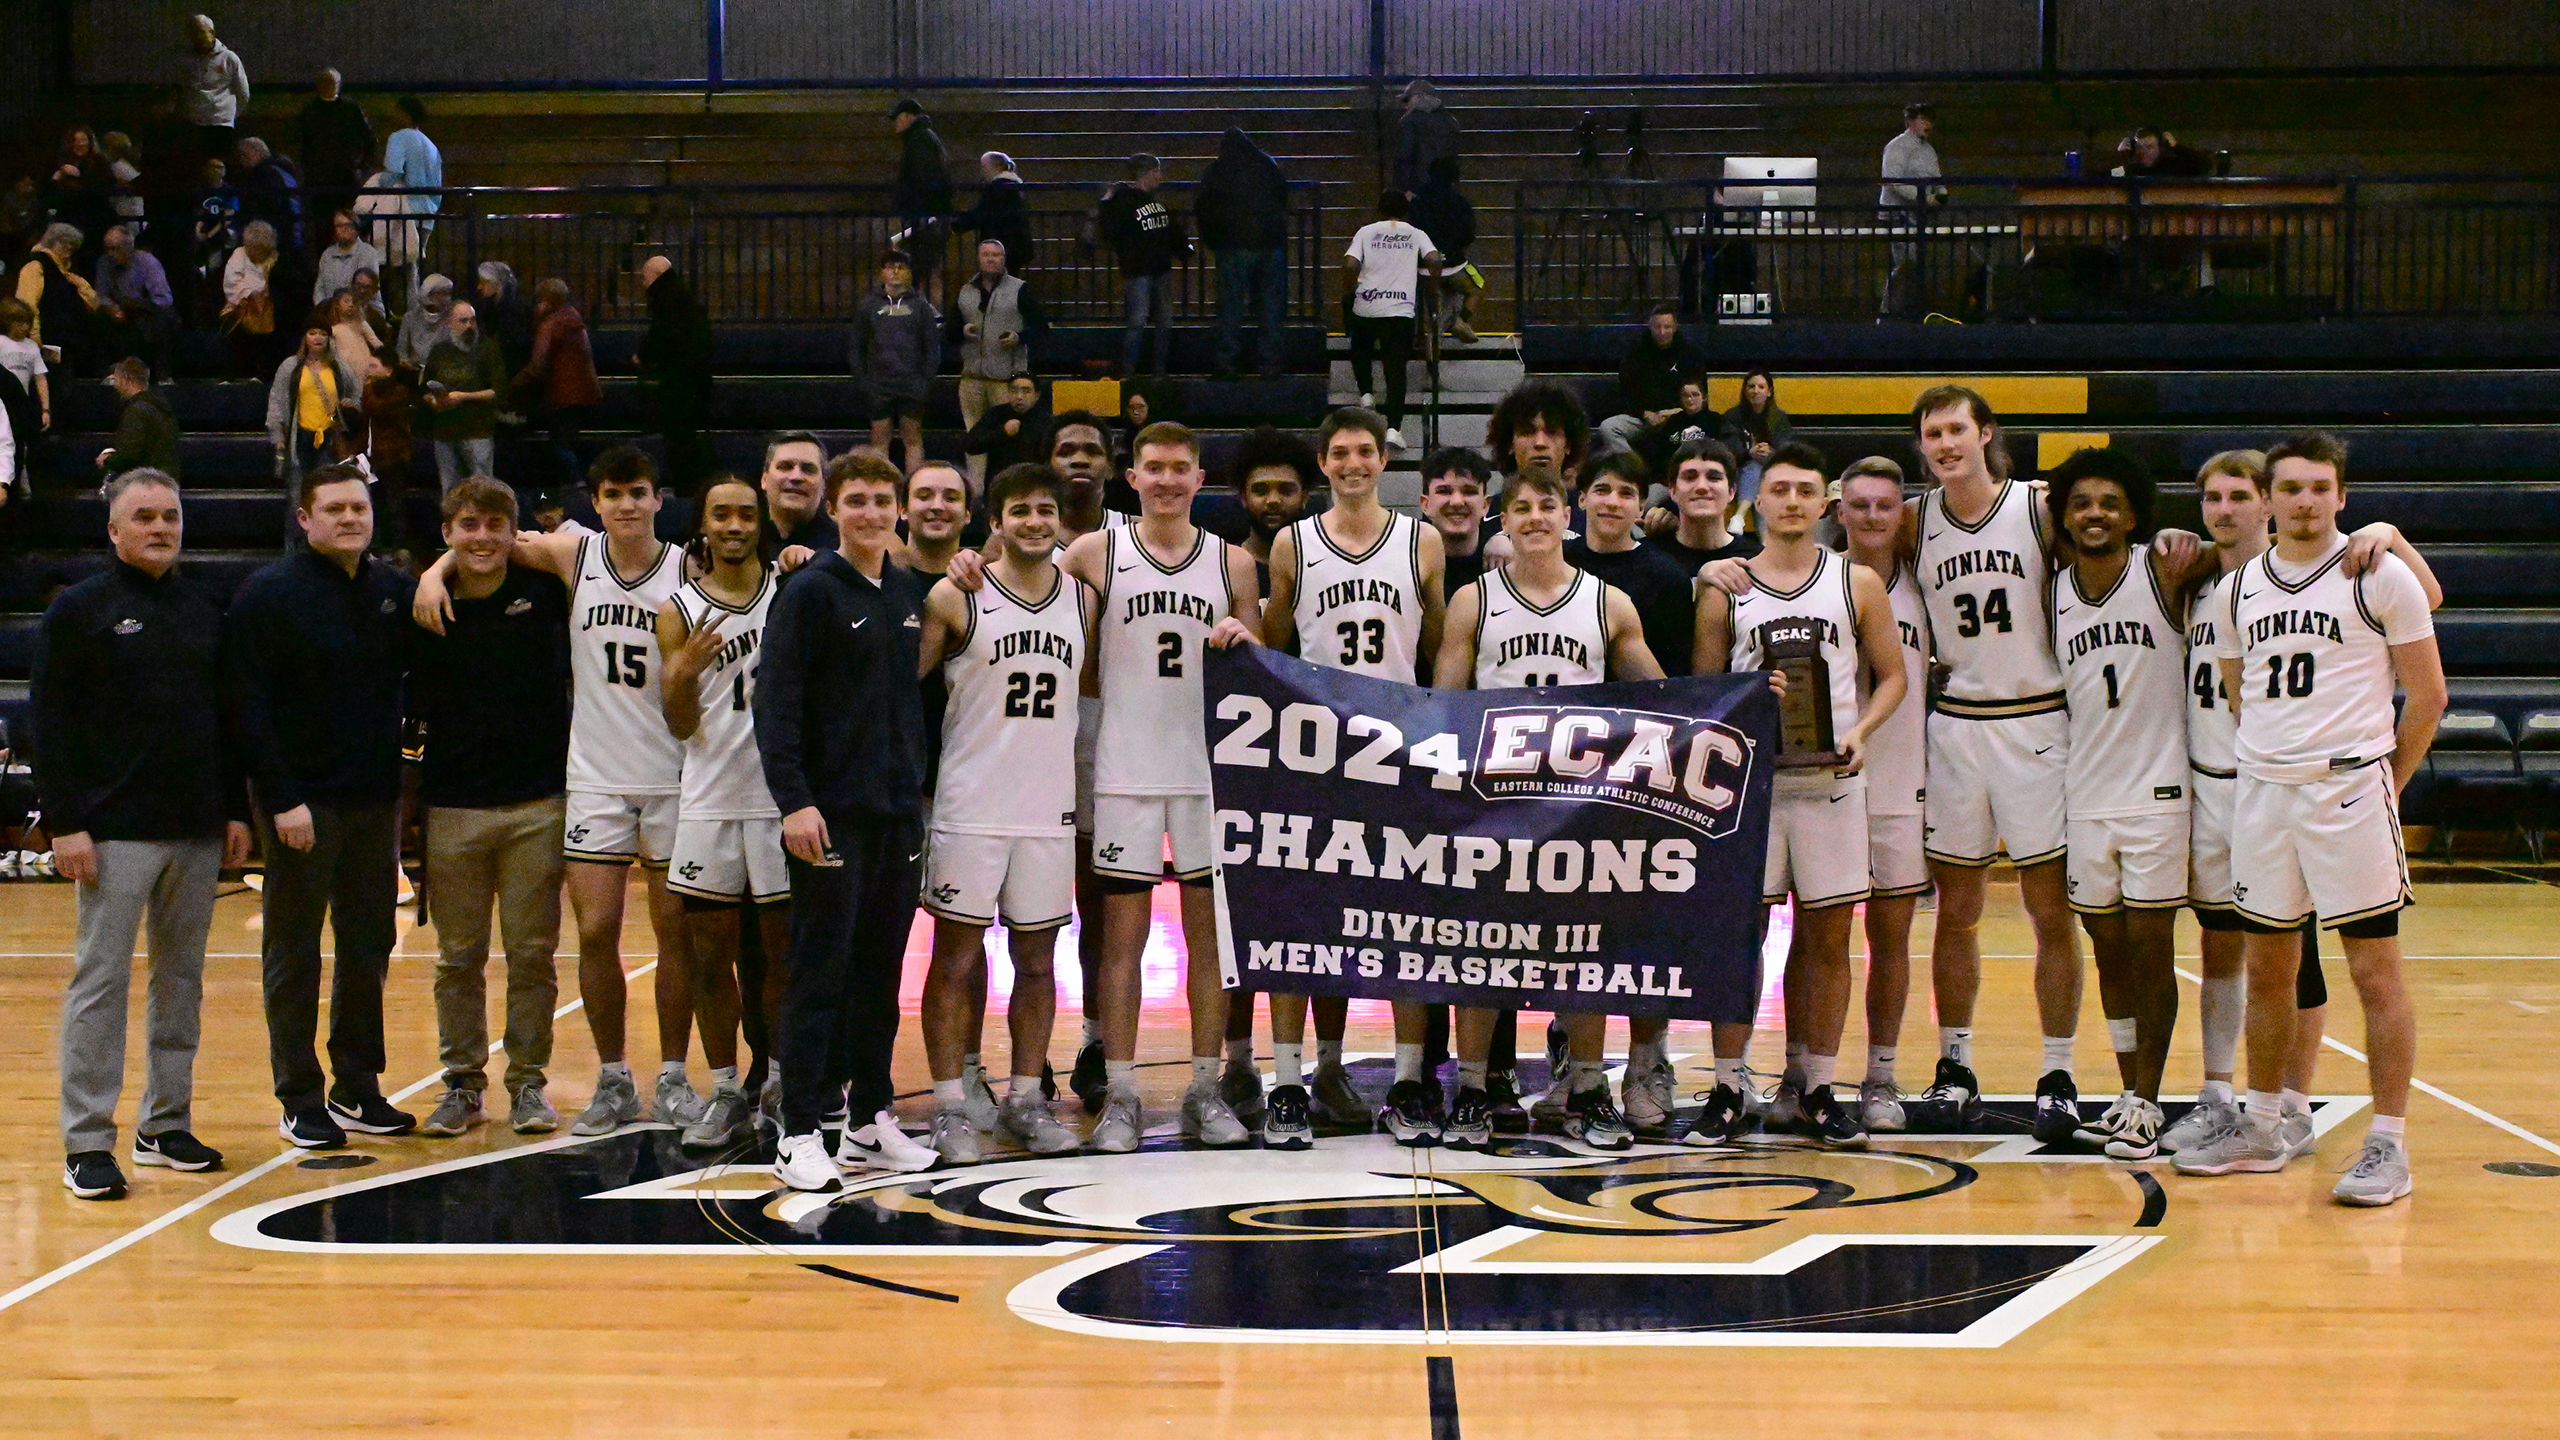 Men's Basketball Tops Golden Wolves, Crowned ECAC Champions